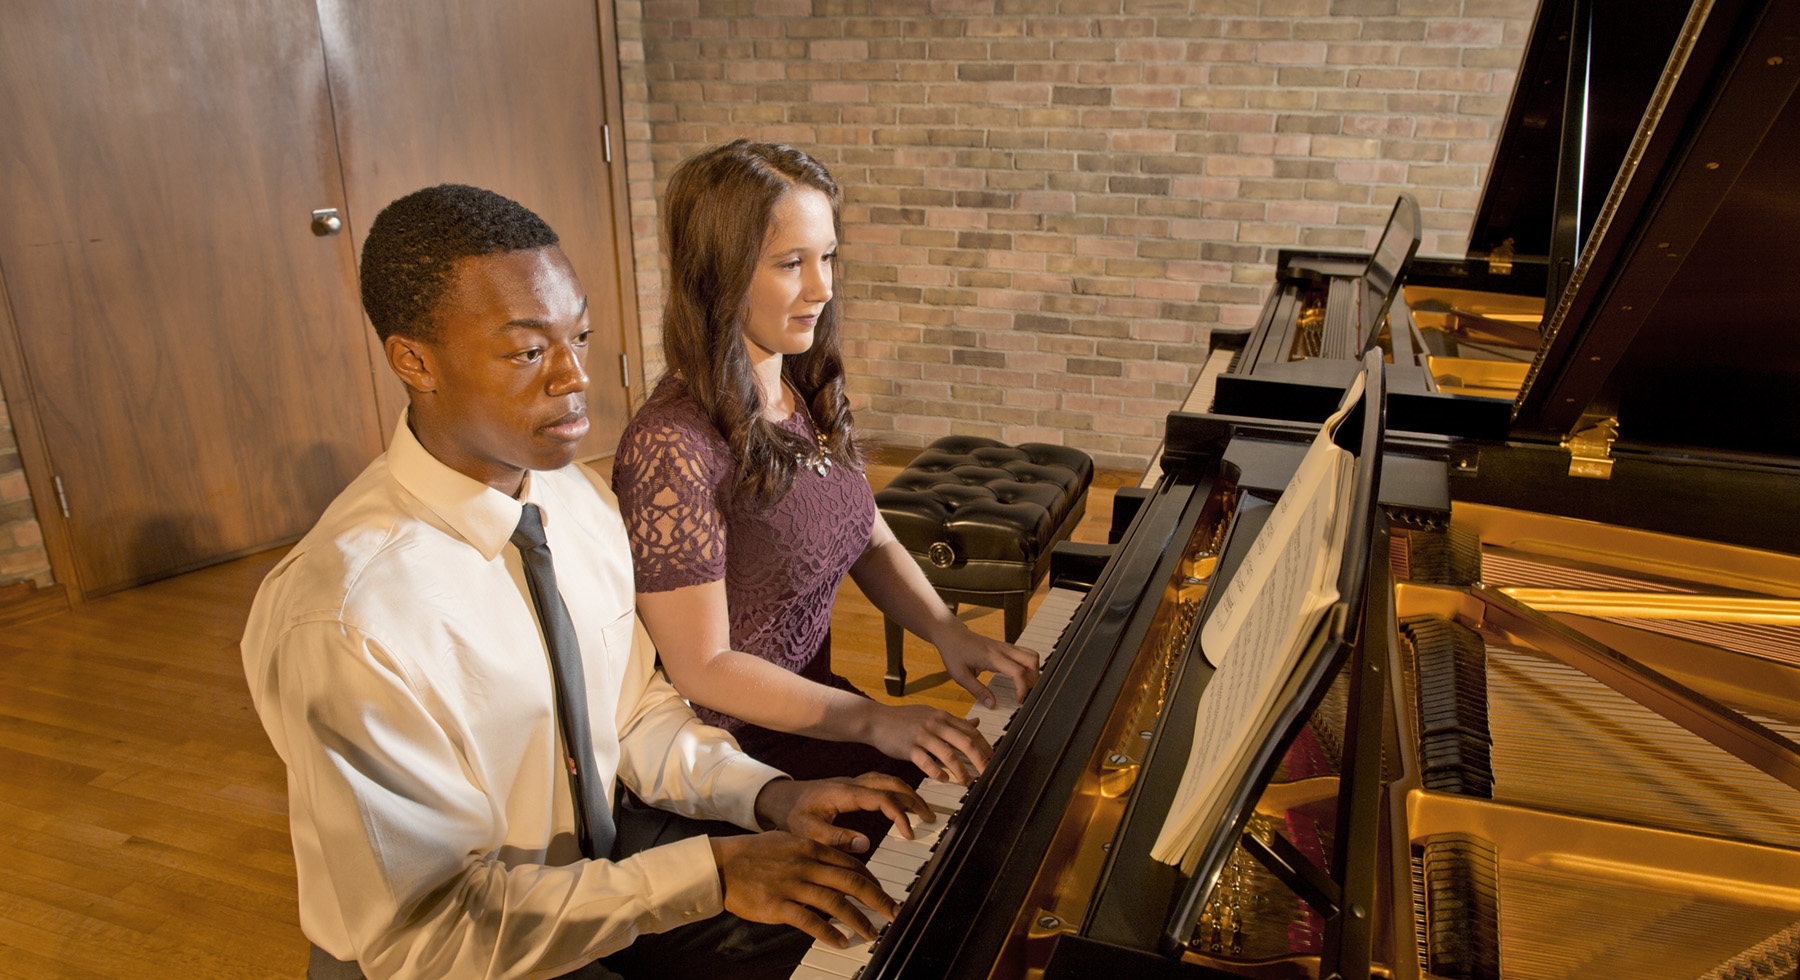 University of Mount Union students performing on the Piano in Presser Recital Hall